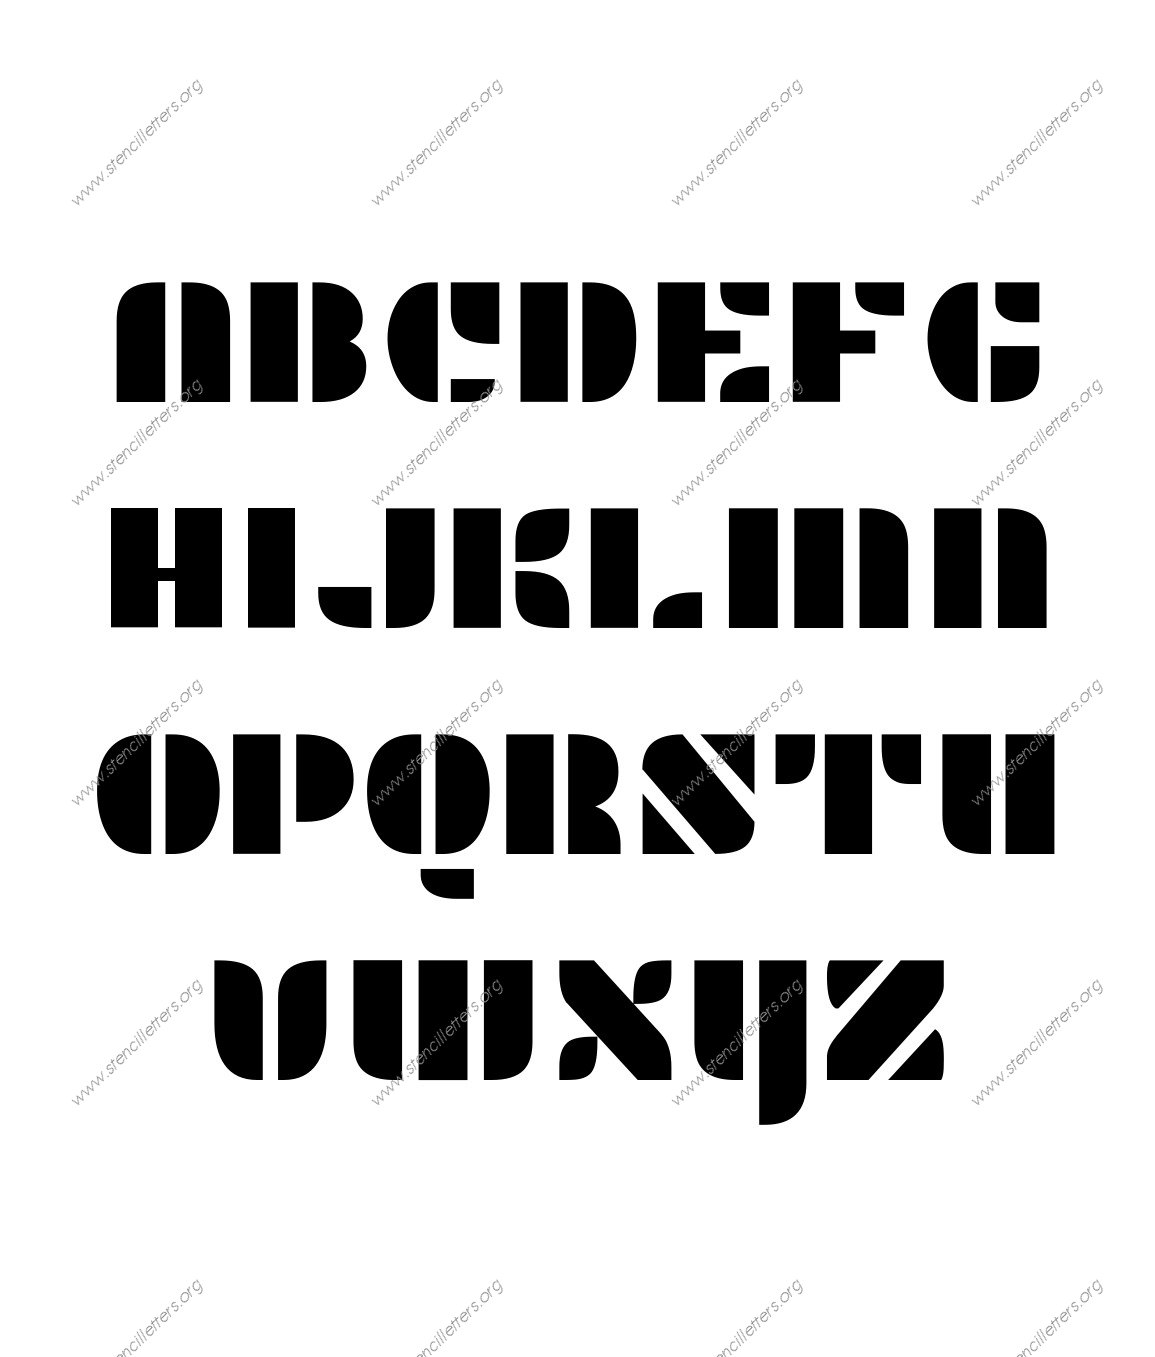 Display Decorative A to Z uppercase letter stencils